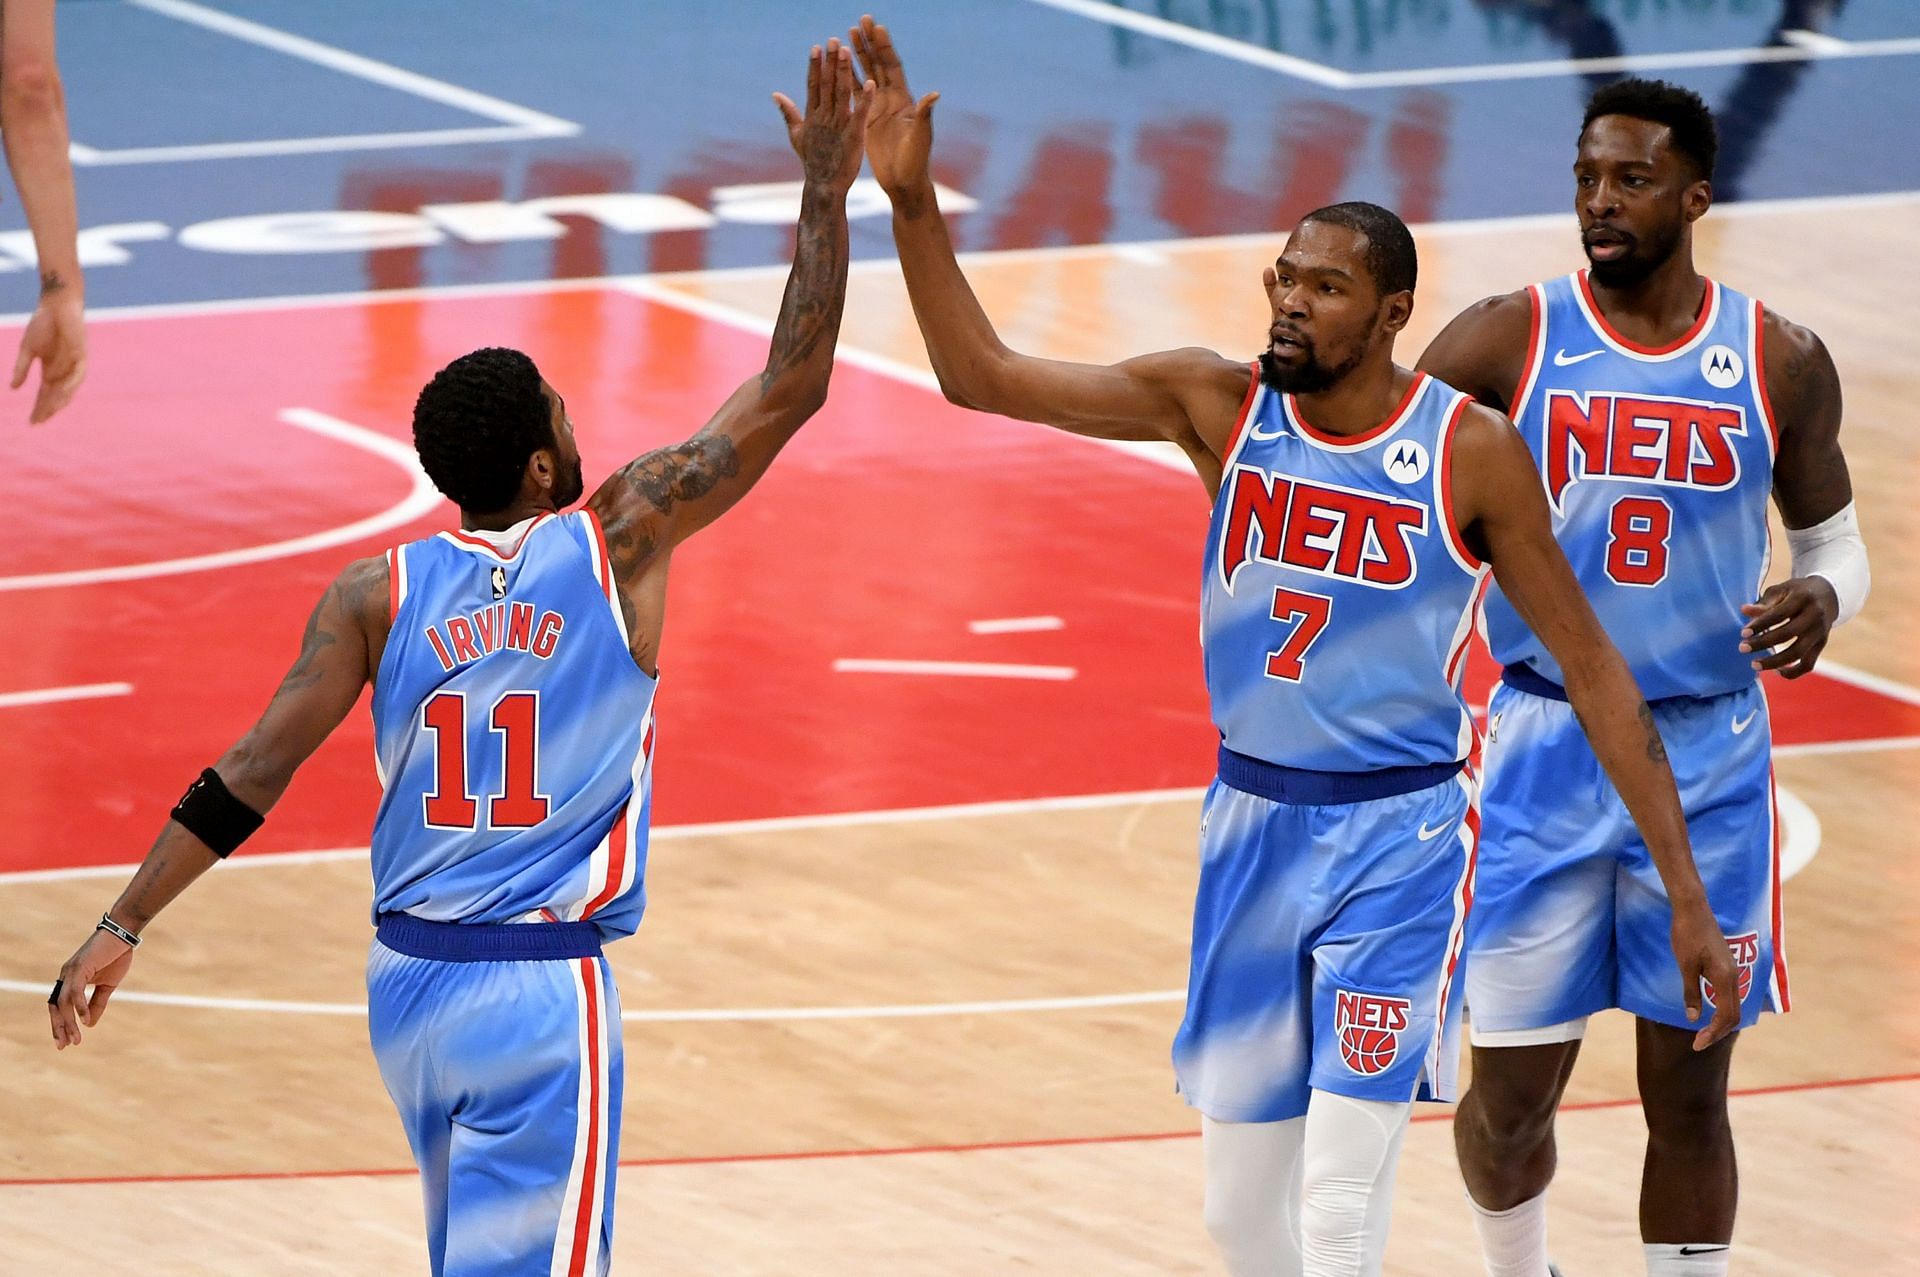 Kyrie Irving #11 and Kevin Durant #7 of the Brooklyn Nets celebrate